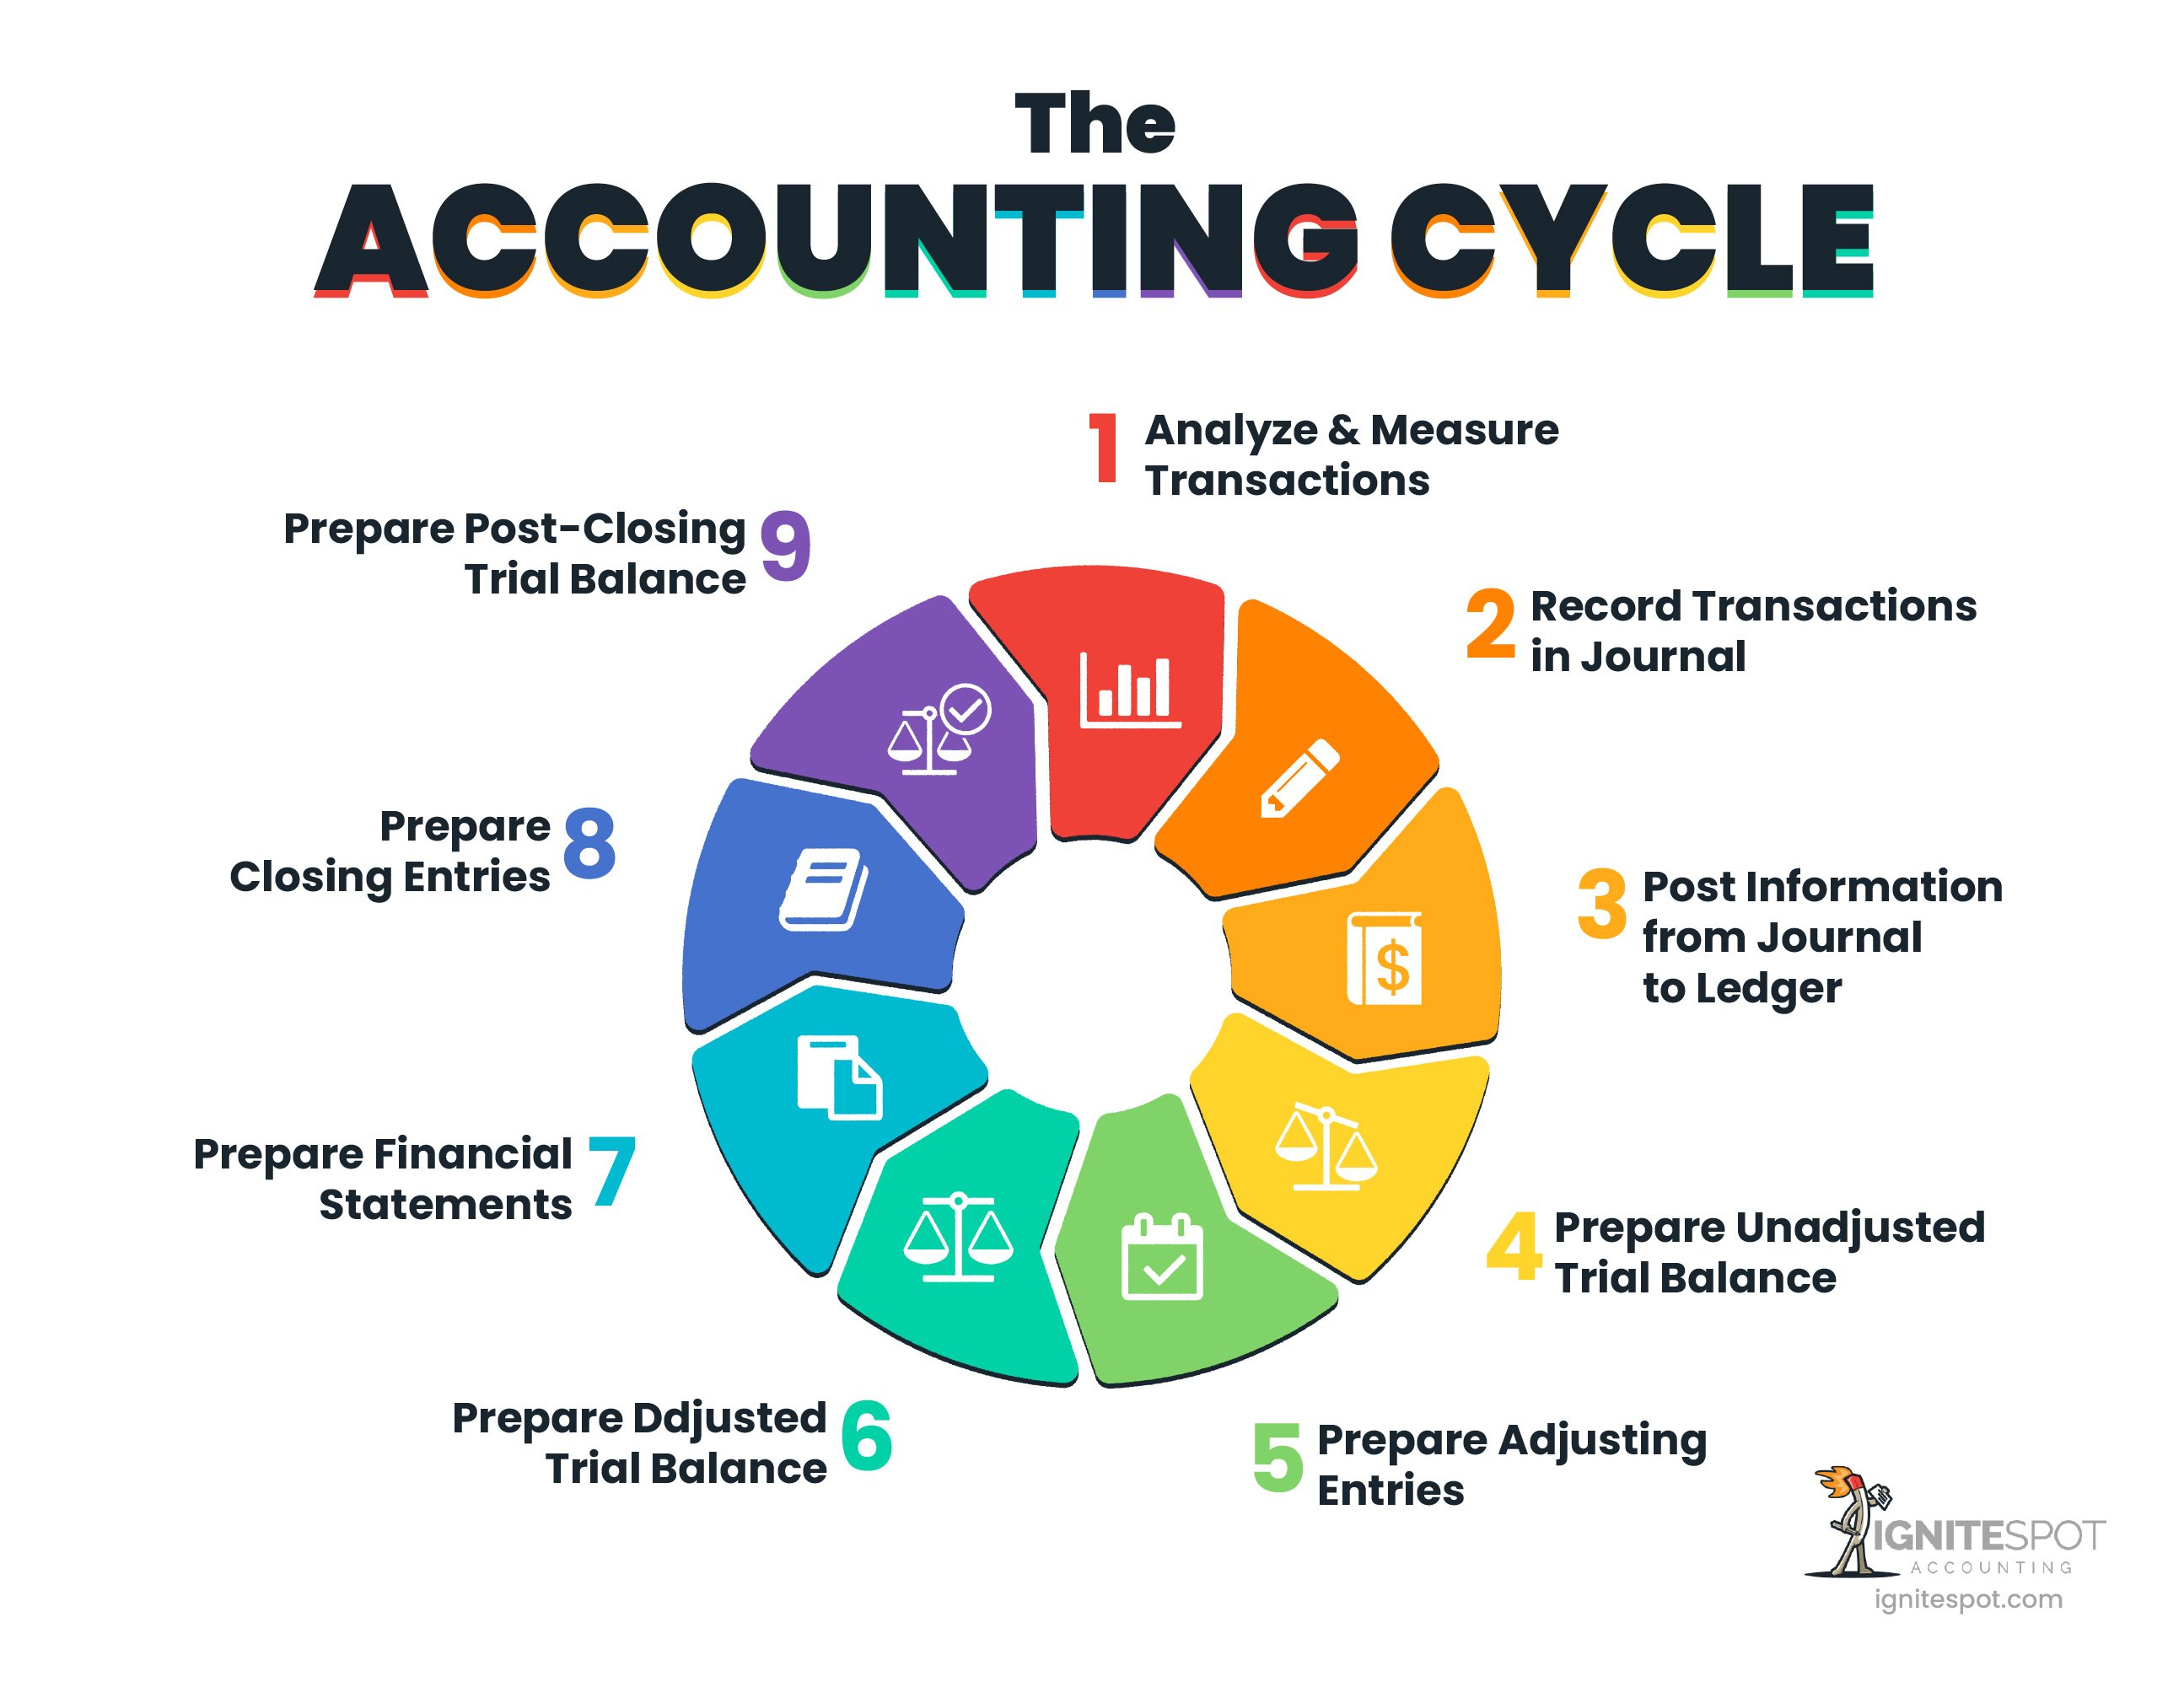 Basic Accounting: The Accounting Cycle Explained